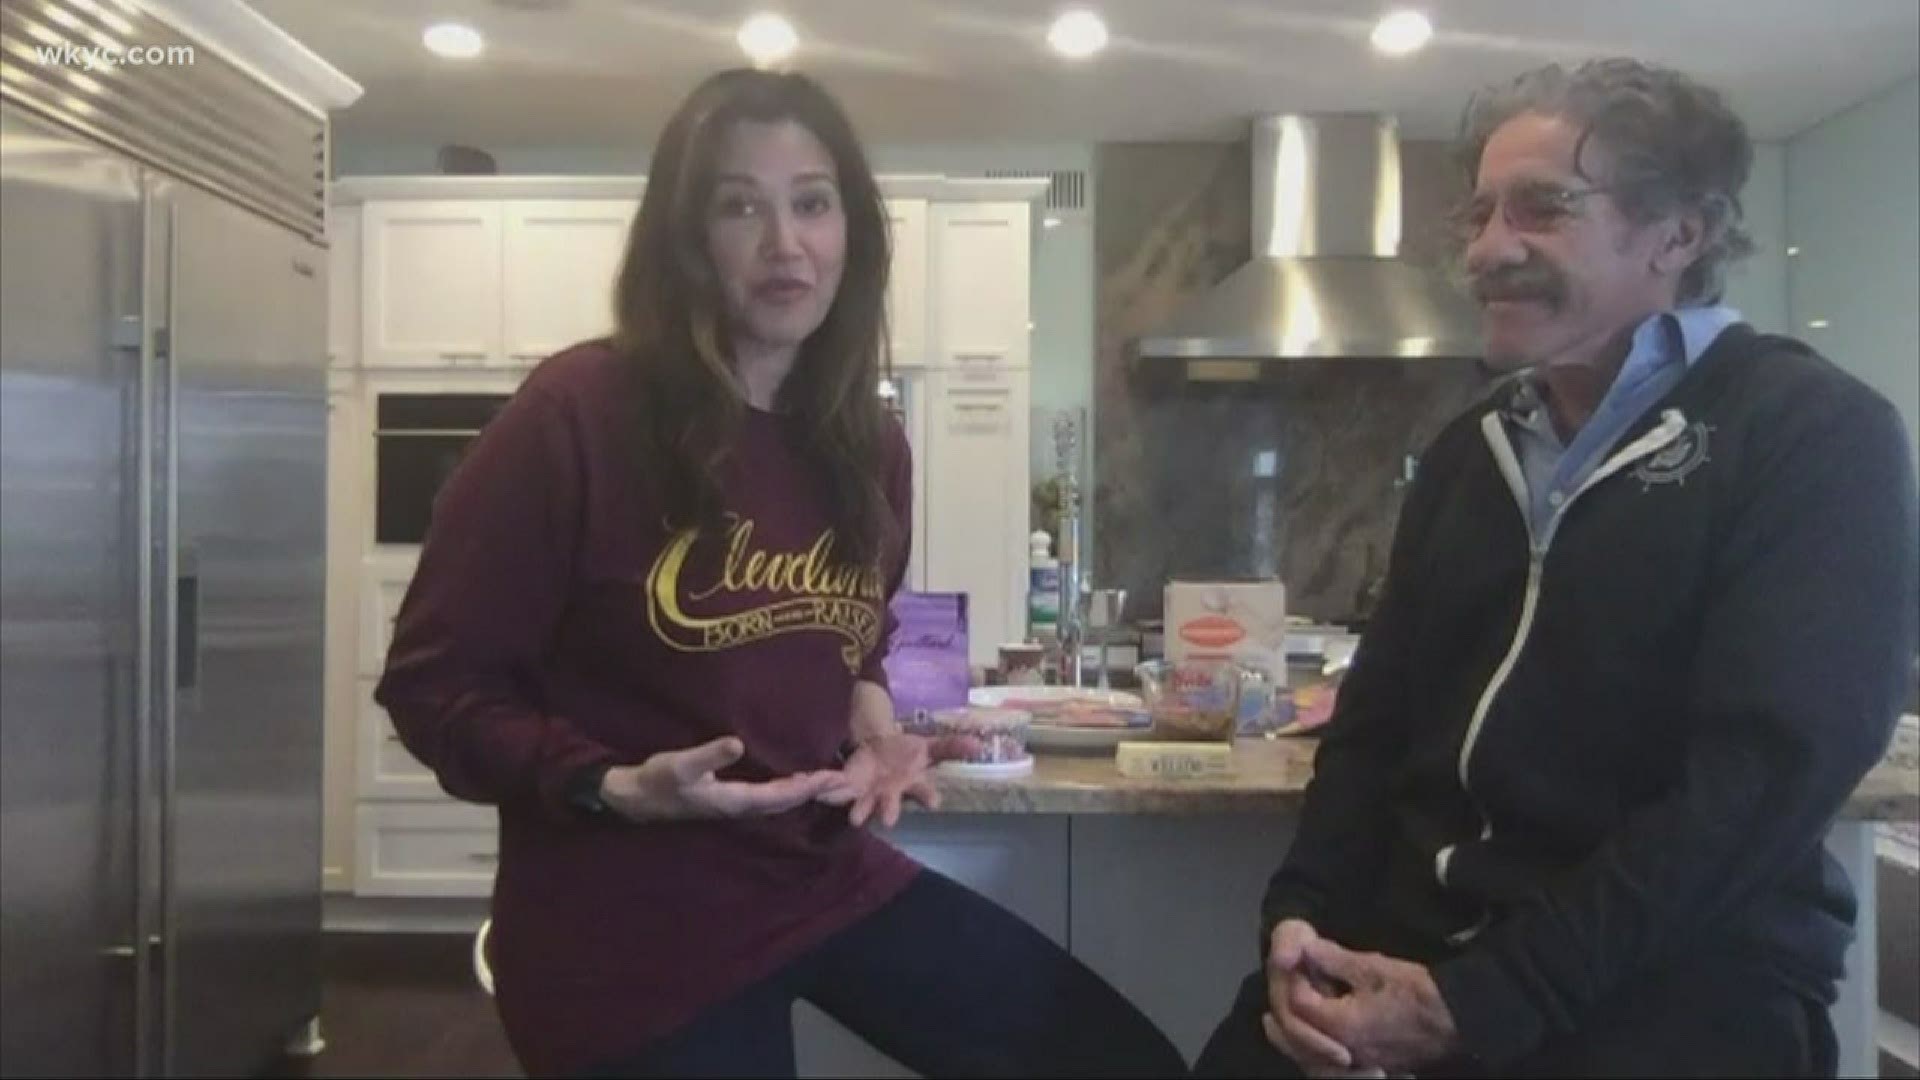 Jewish families around the world and in NEO are preparing for the start of Passover Wednesday night. Erica, Geraldo Rivera tell us how they plan to adapt to the time